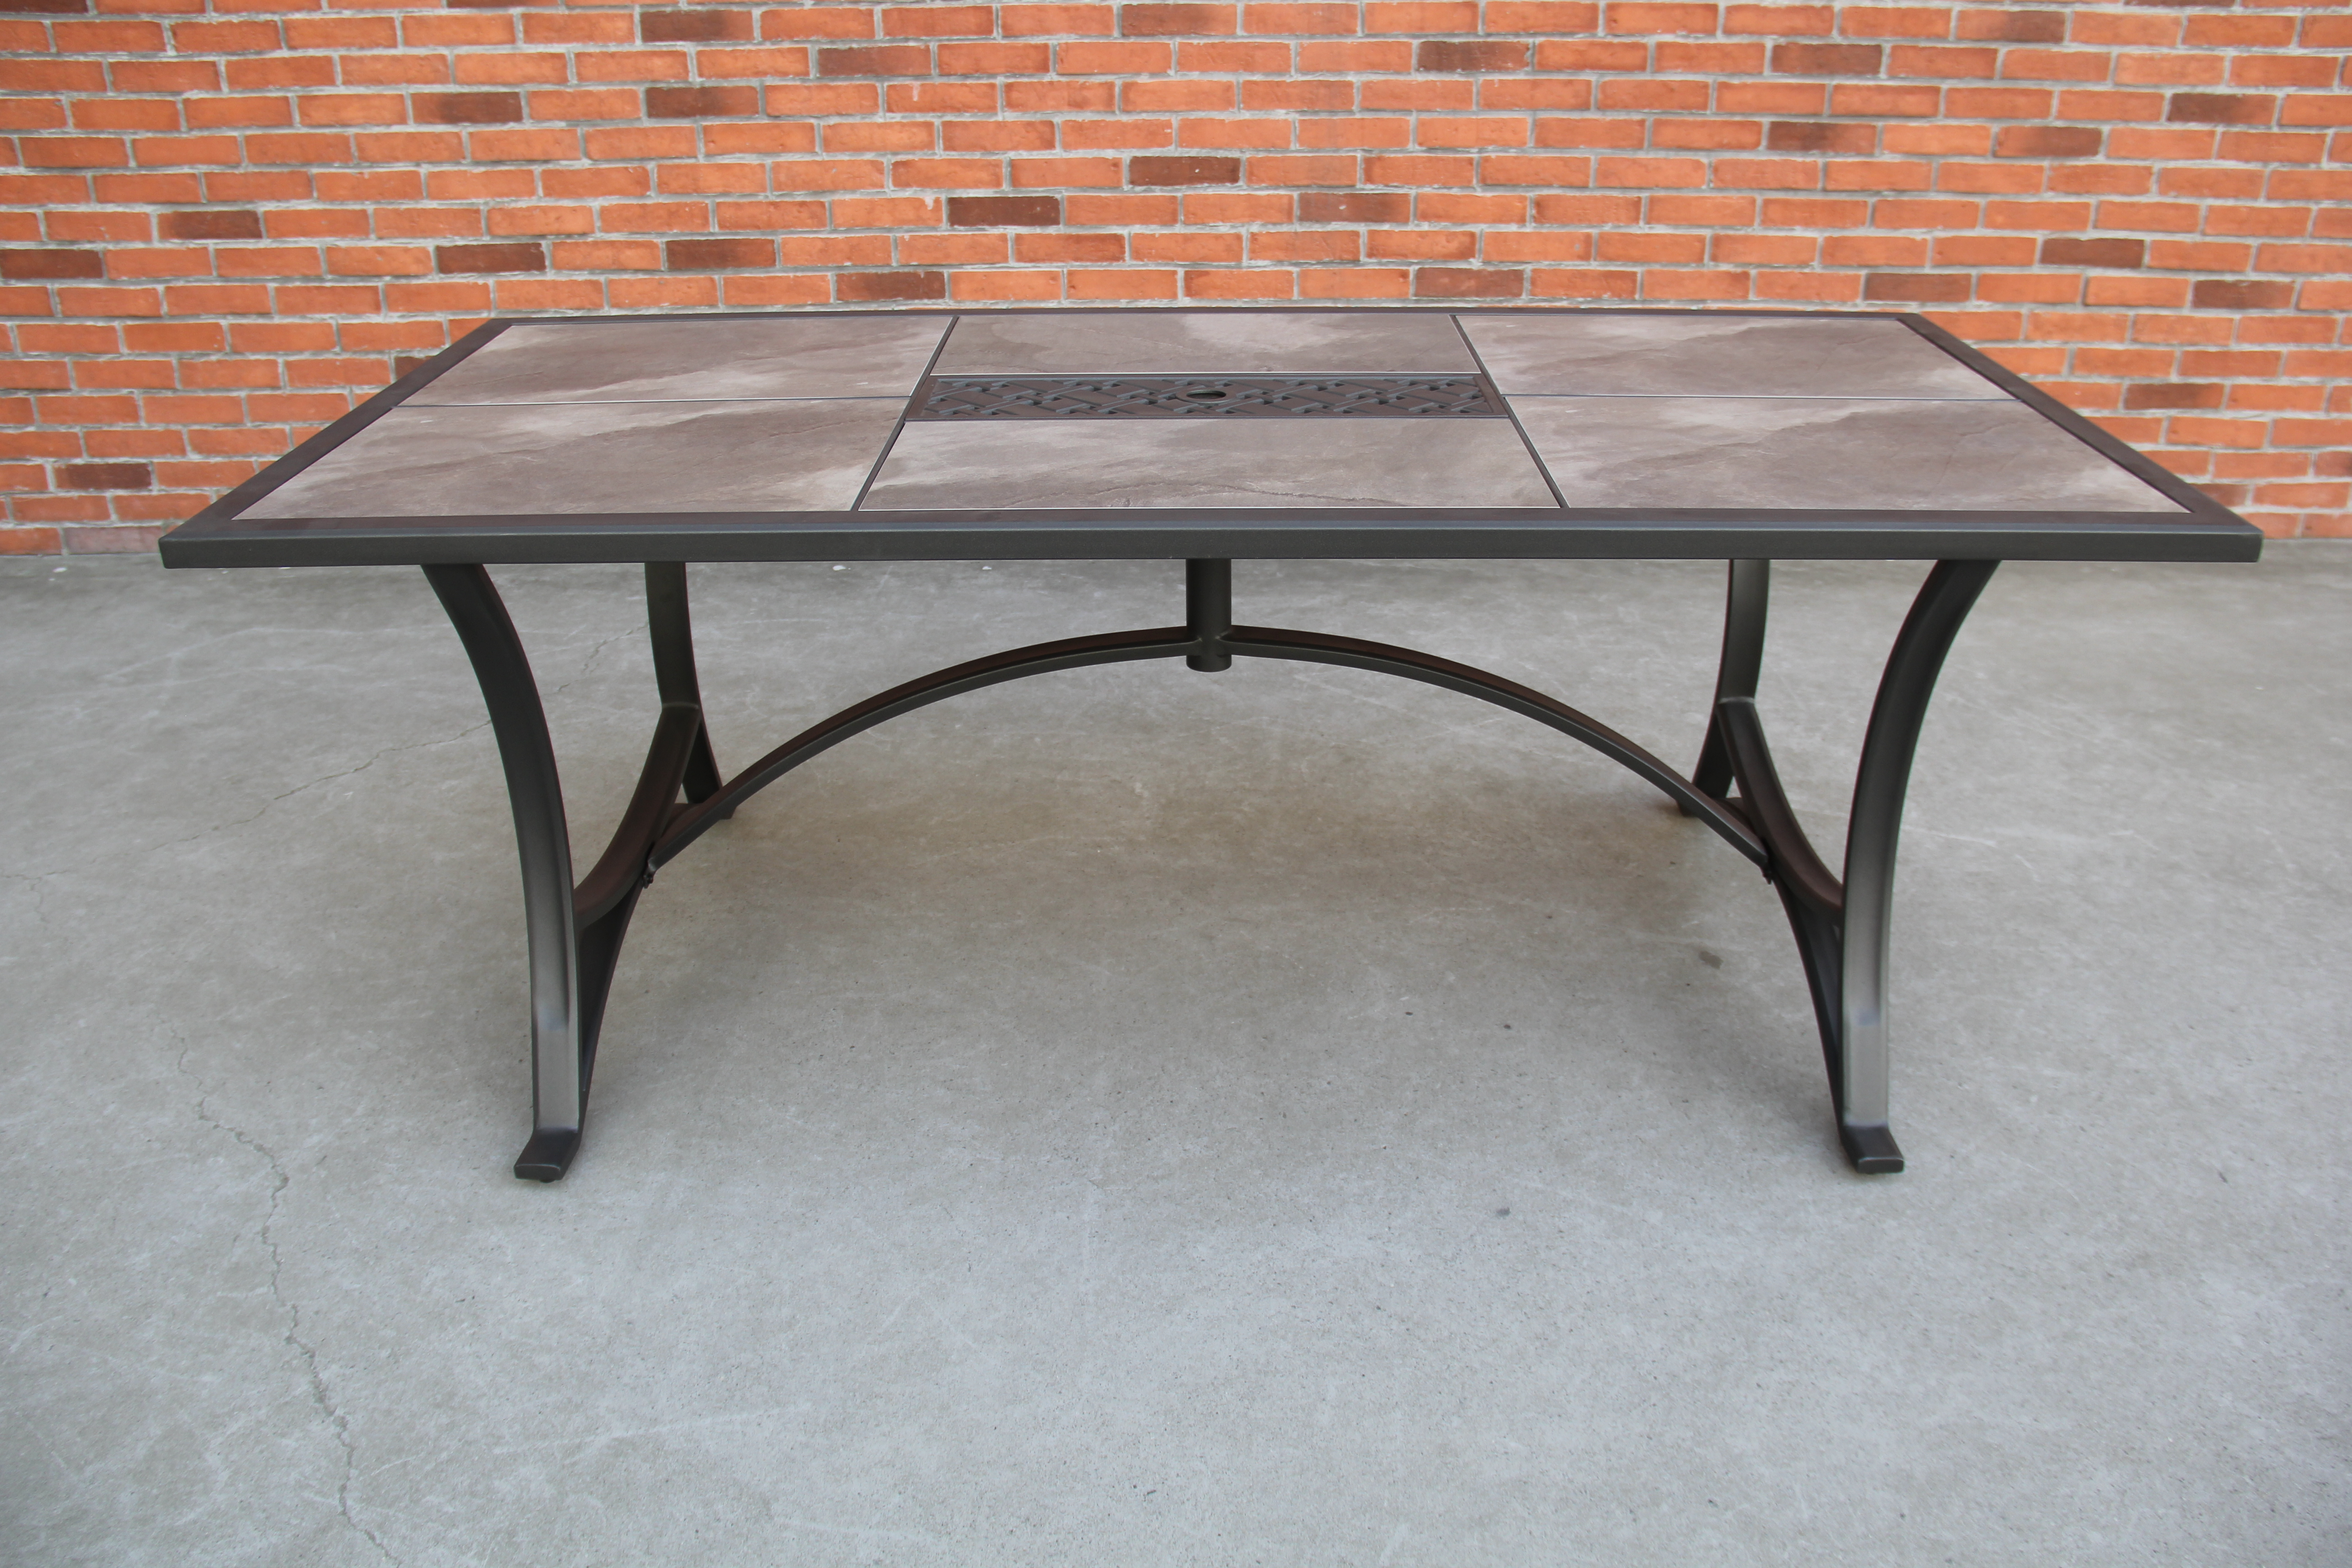 Sutton Rowe 74" Replacement Fillmore Patio Table